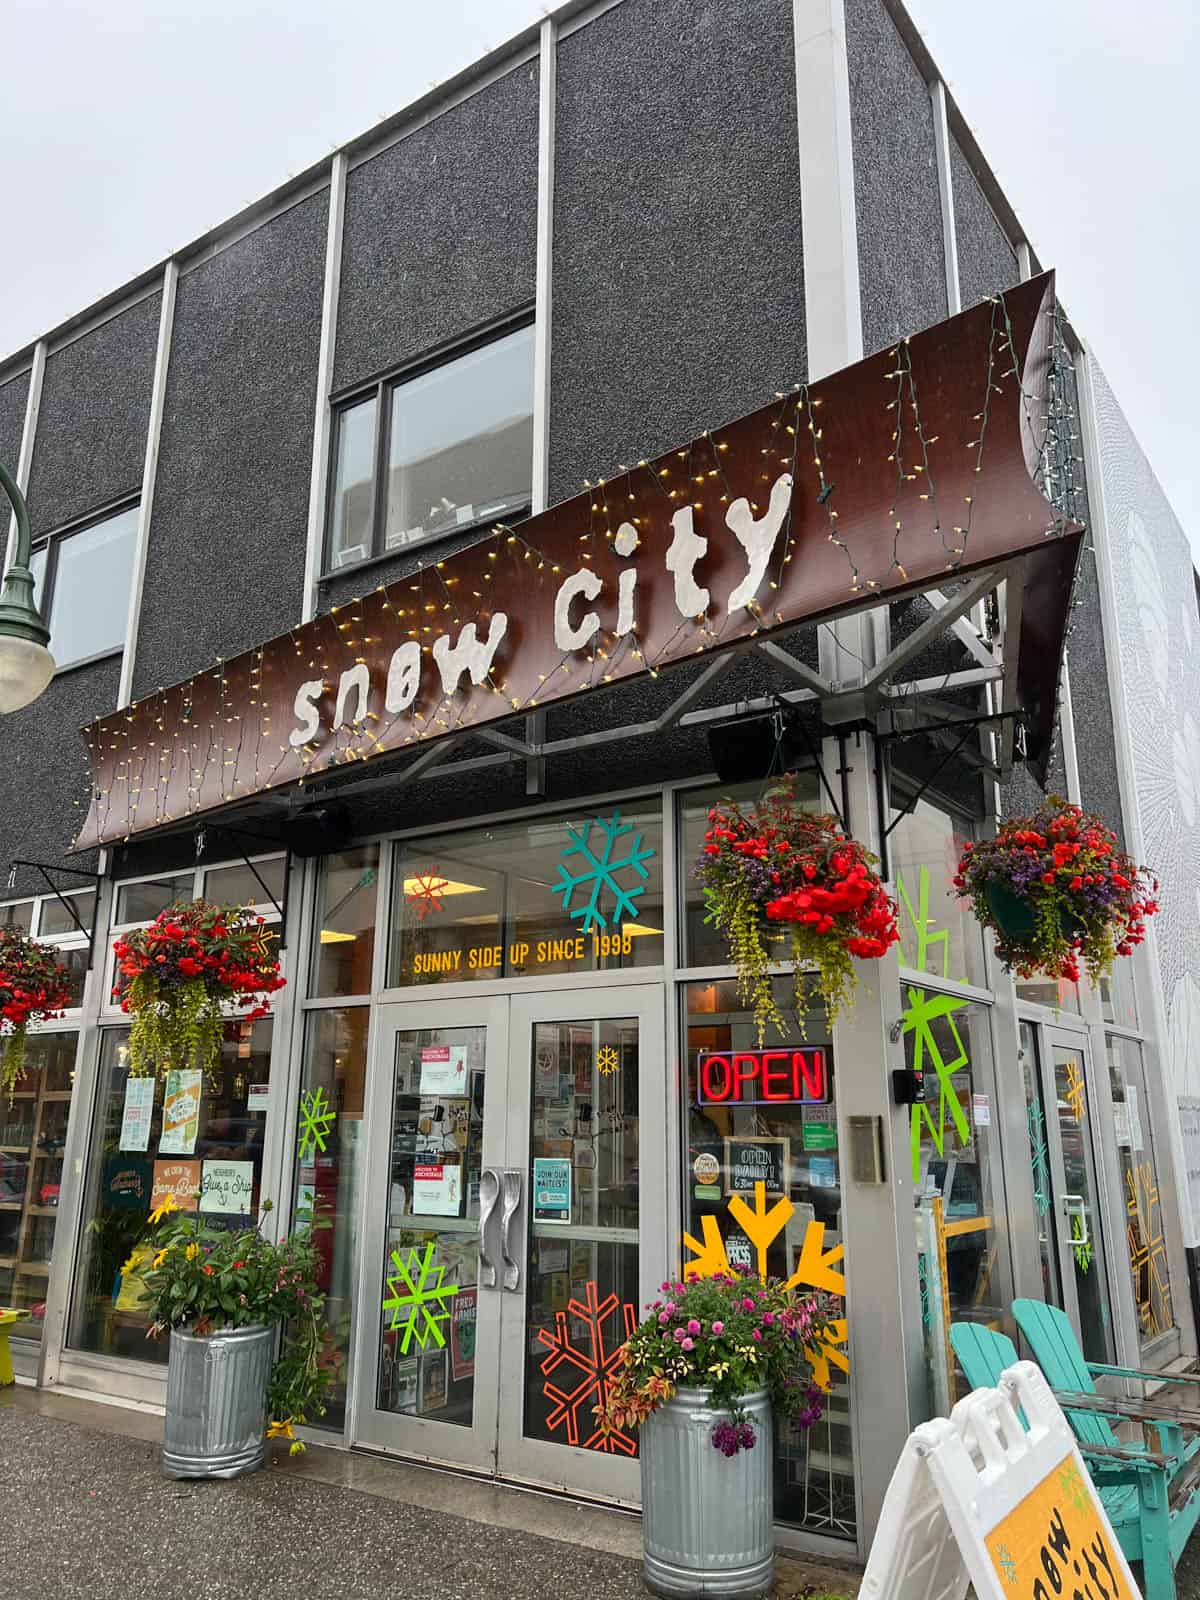 An image of the exterior of Snow City Cafe in downtown Anchorage, Alaska.